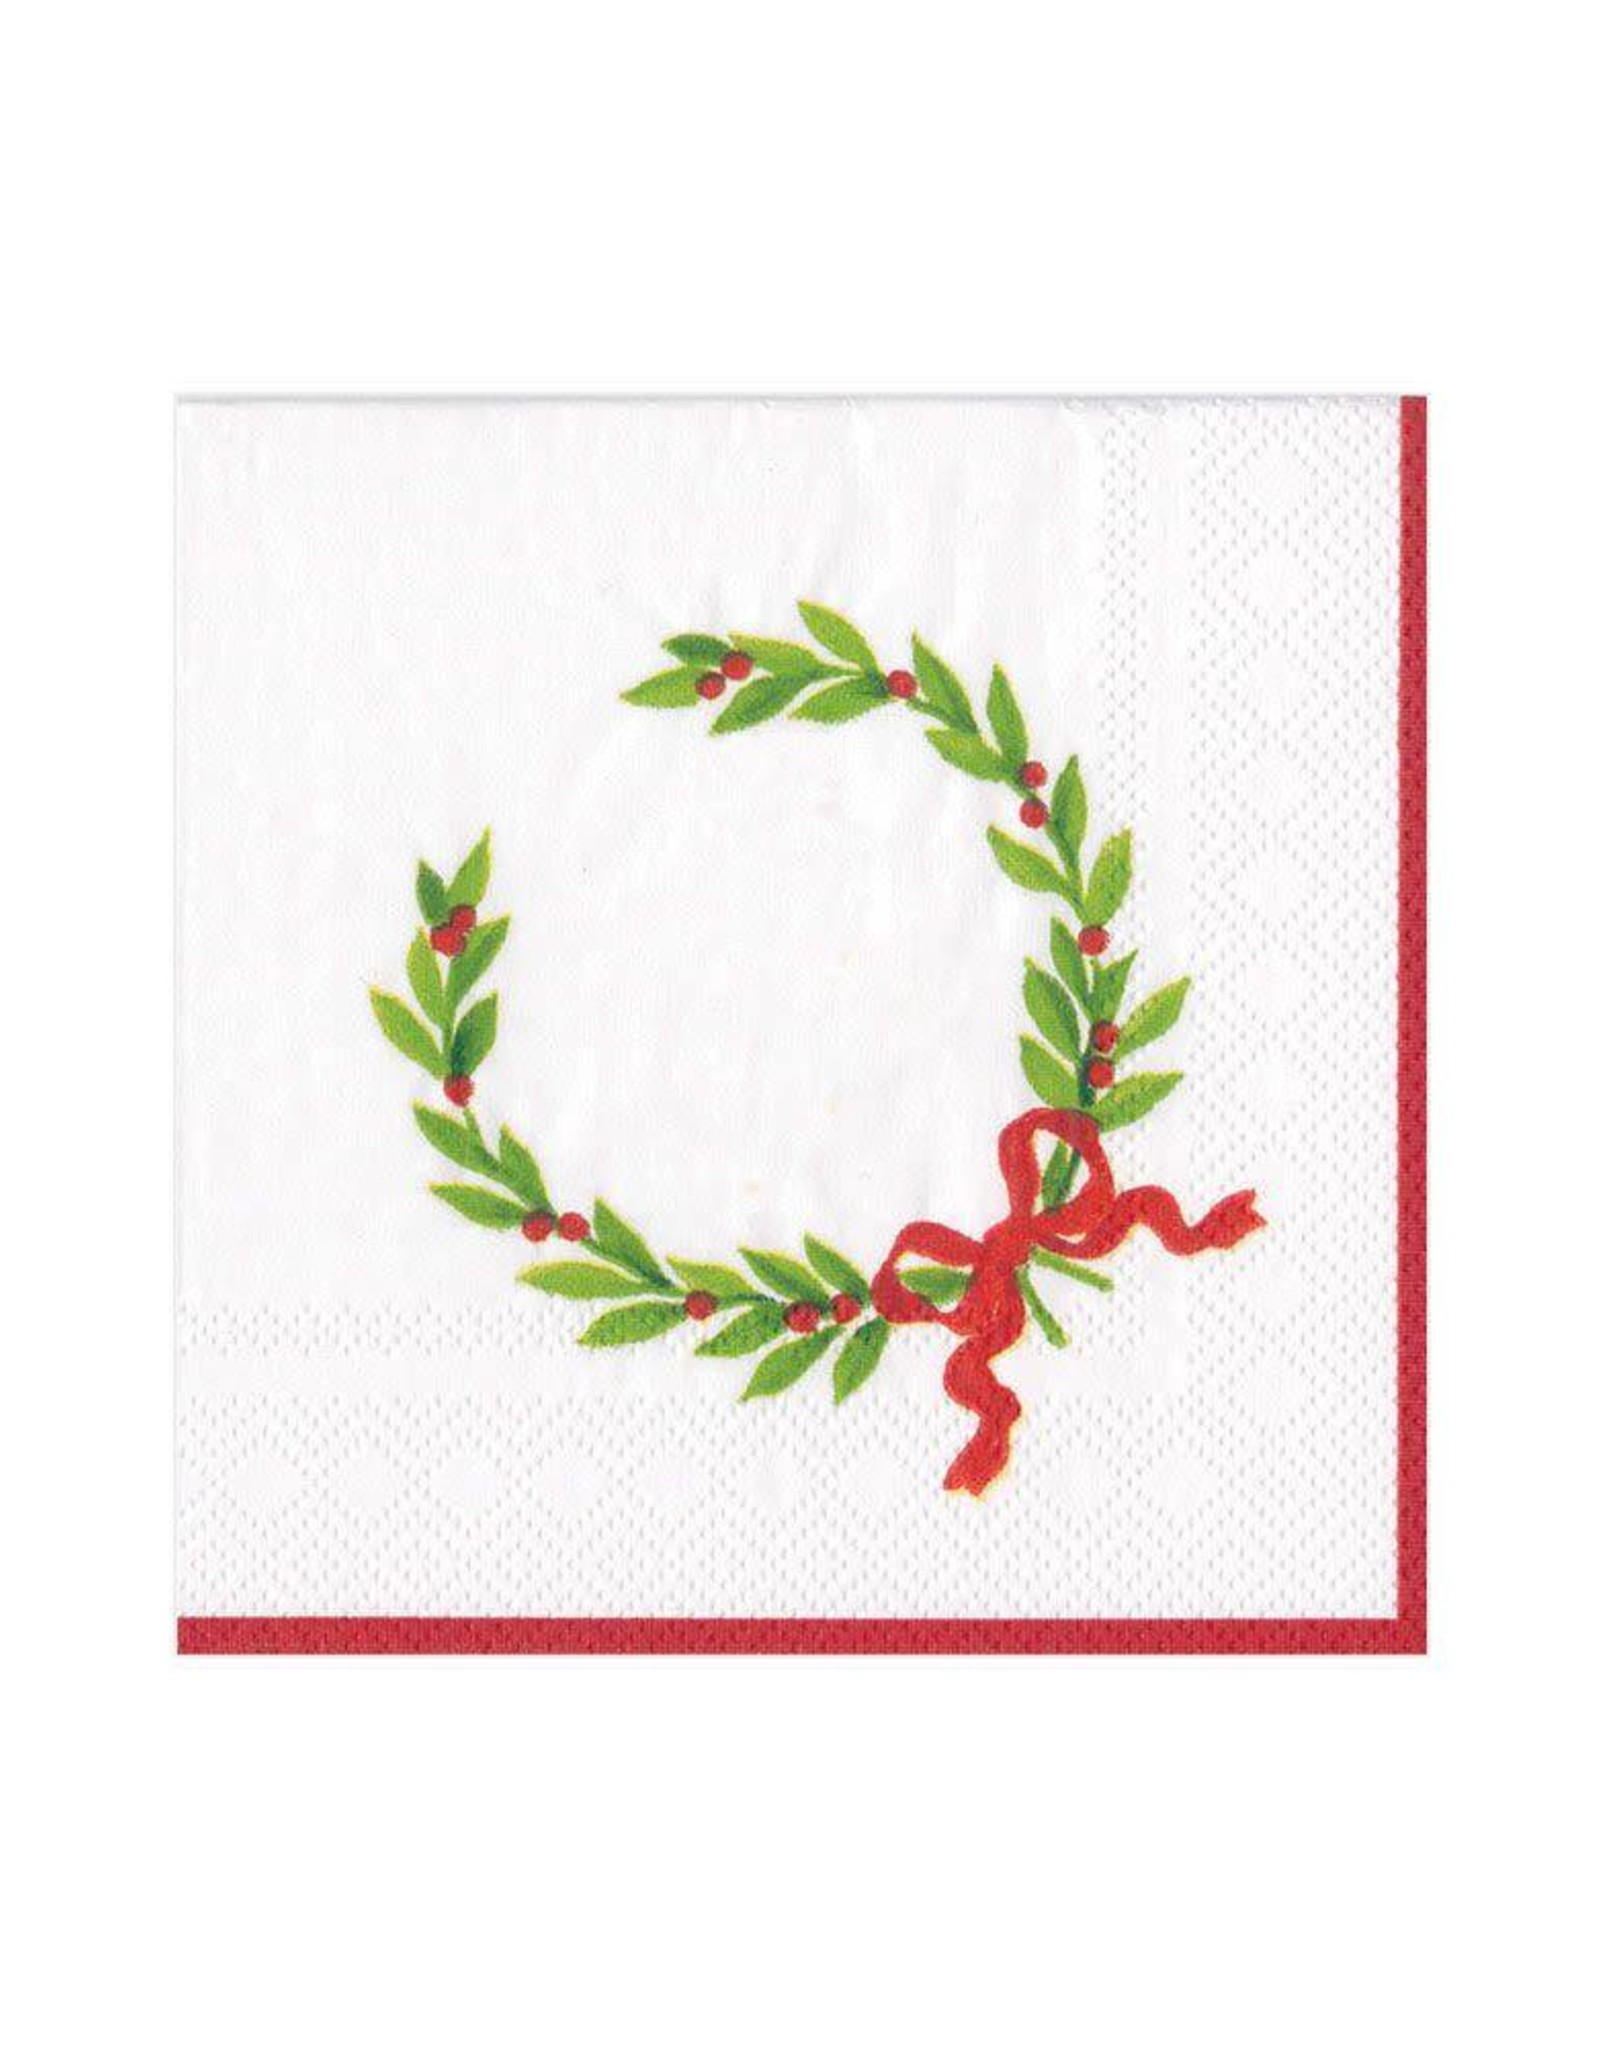 Christmas Laurel Wreath with Initial "P" Beverage Napkin (20ct)